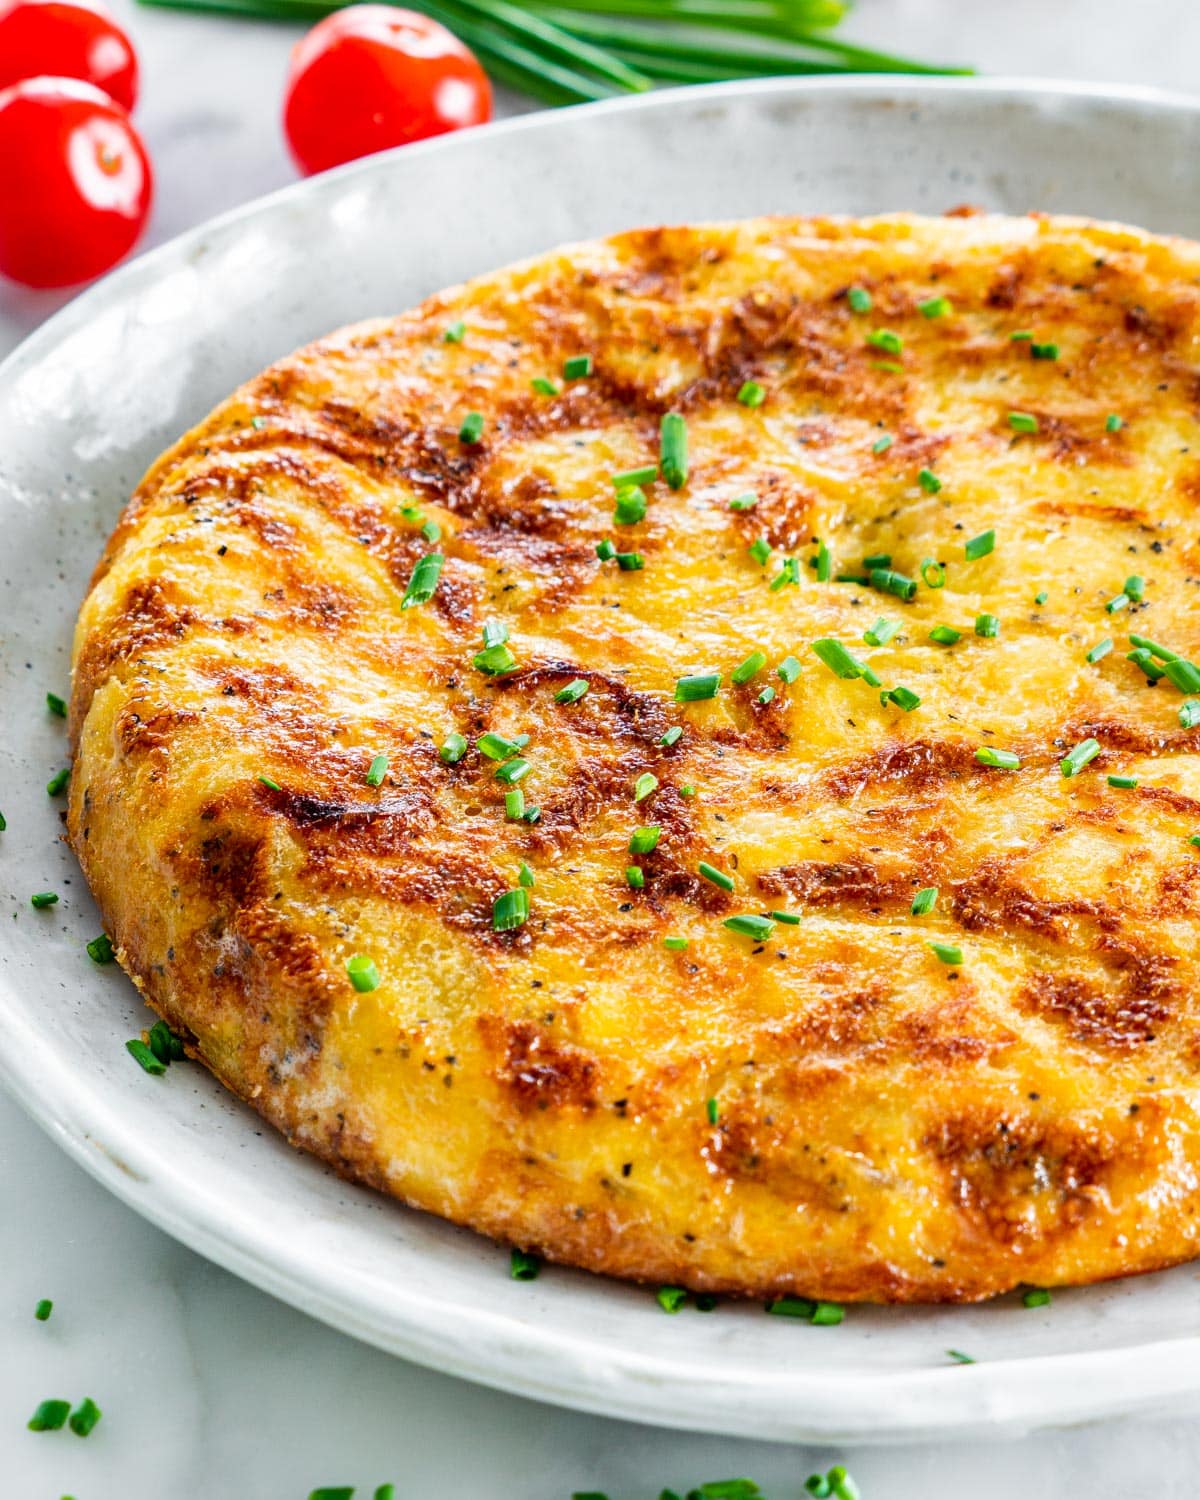 side view shot of a full spanish omelette on a grey plate garnished with chives